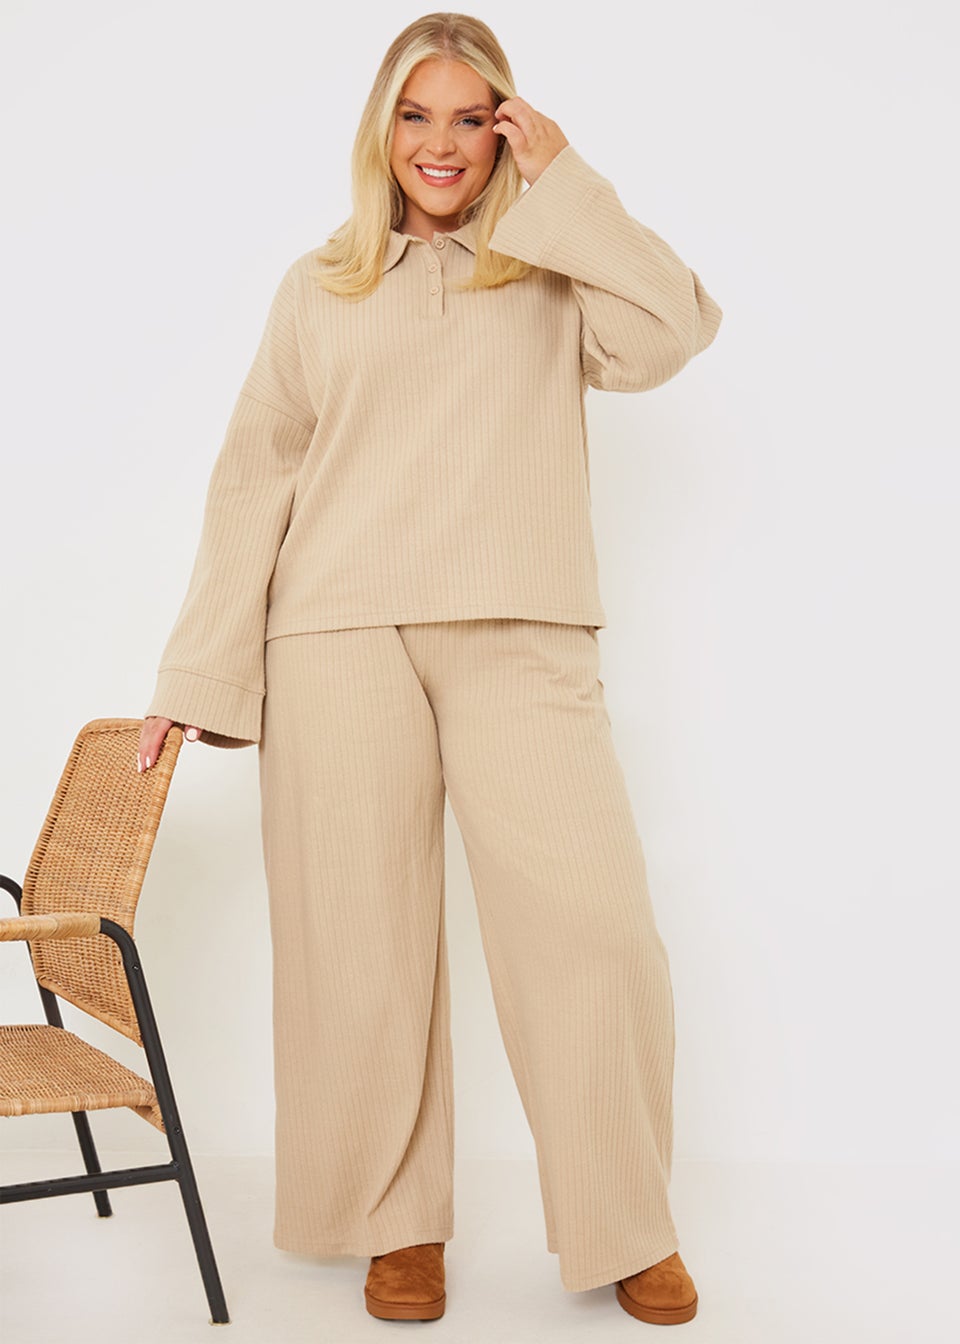 In the Style Gemma Atkinson Beige Brushed Ribbed Co-Ord Trousers